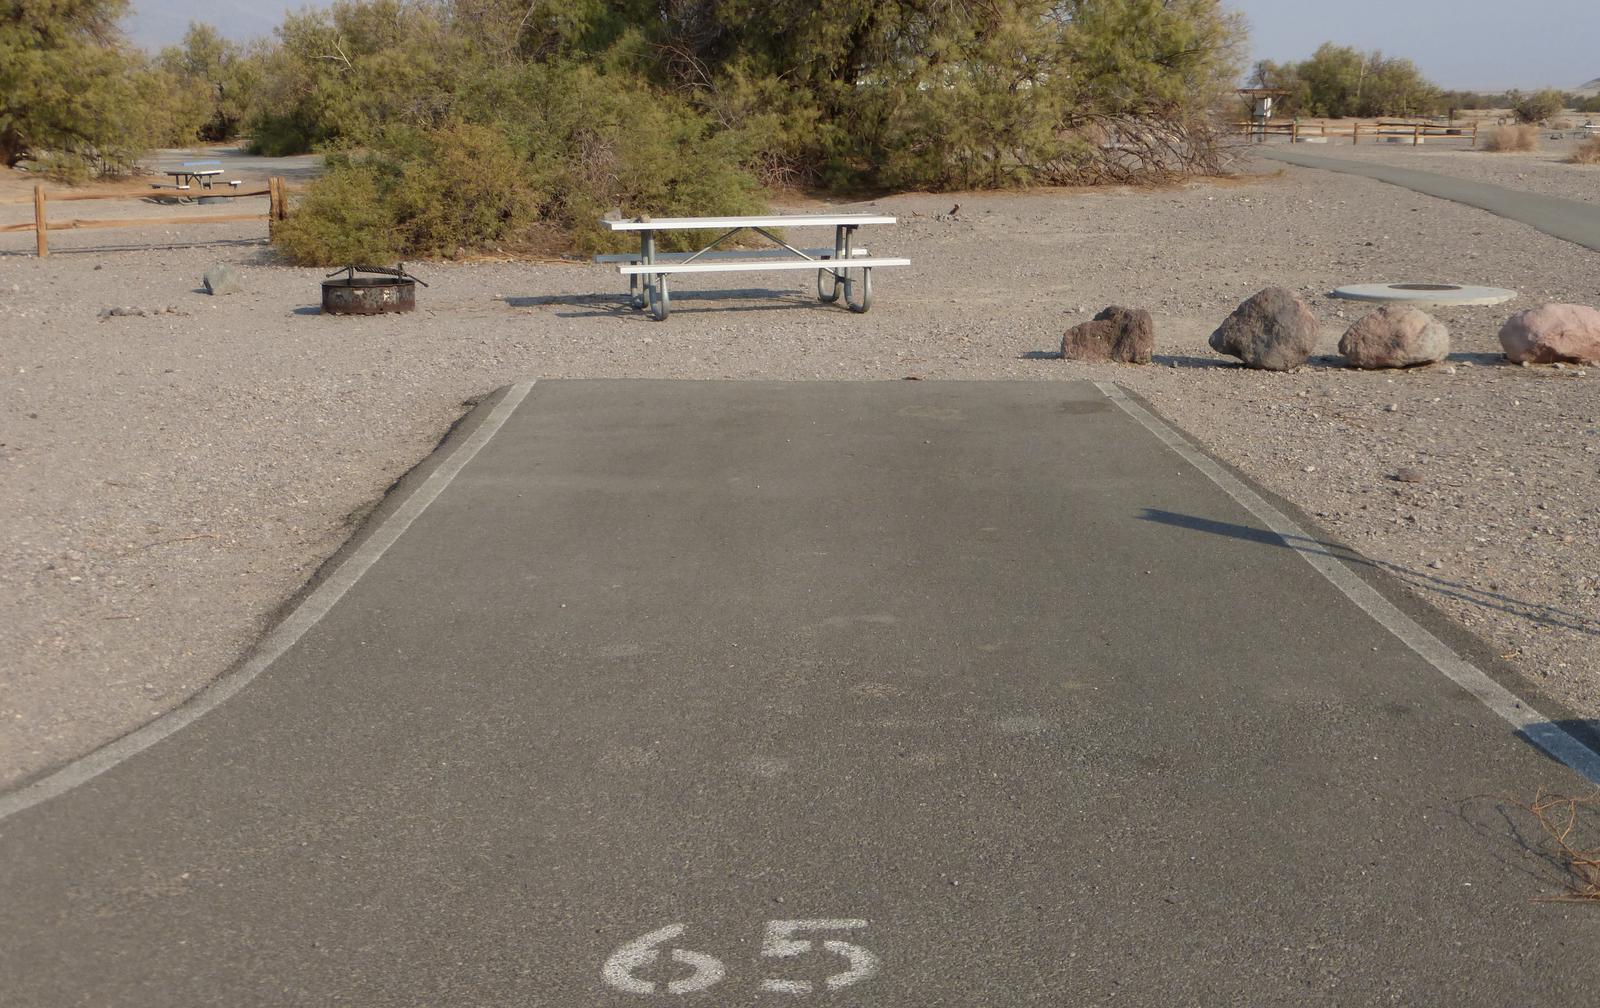 Furnace Creek Campground standard nonelectric site #65 with picnic table and fire ring.